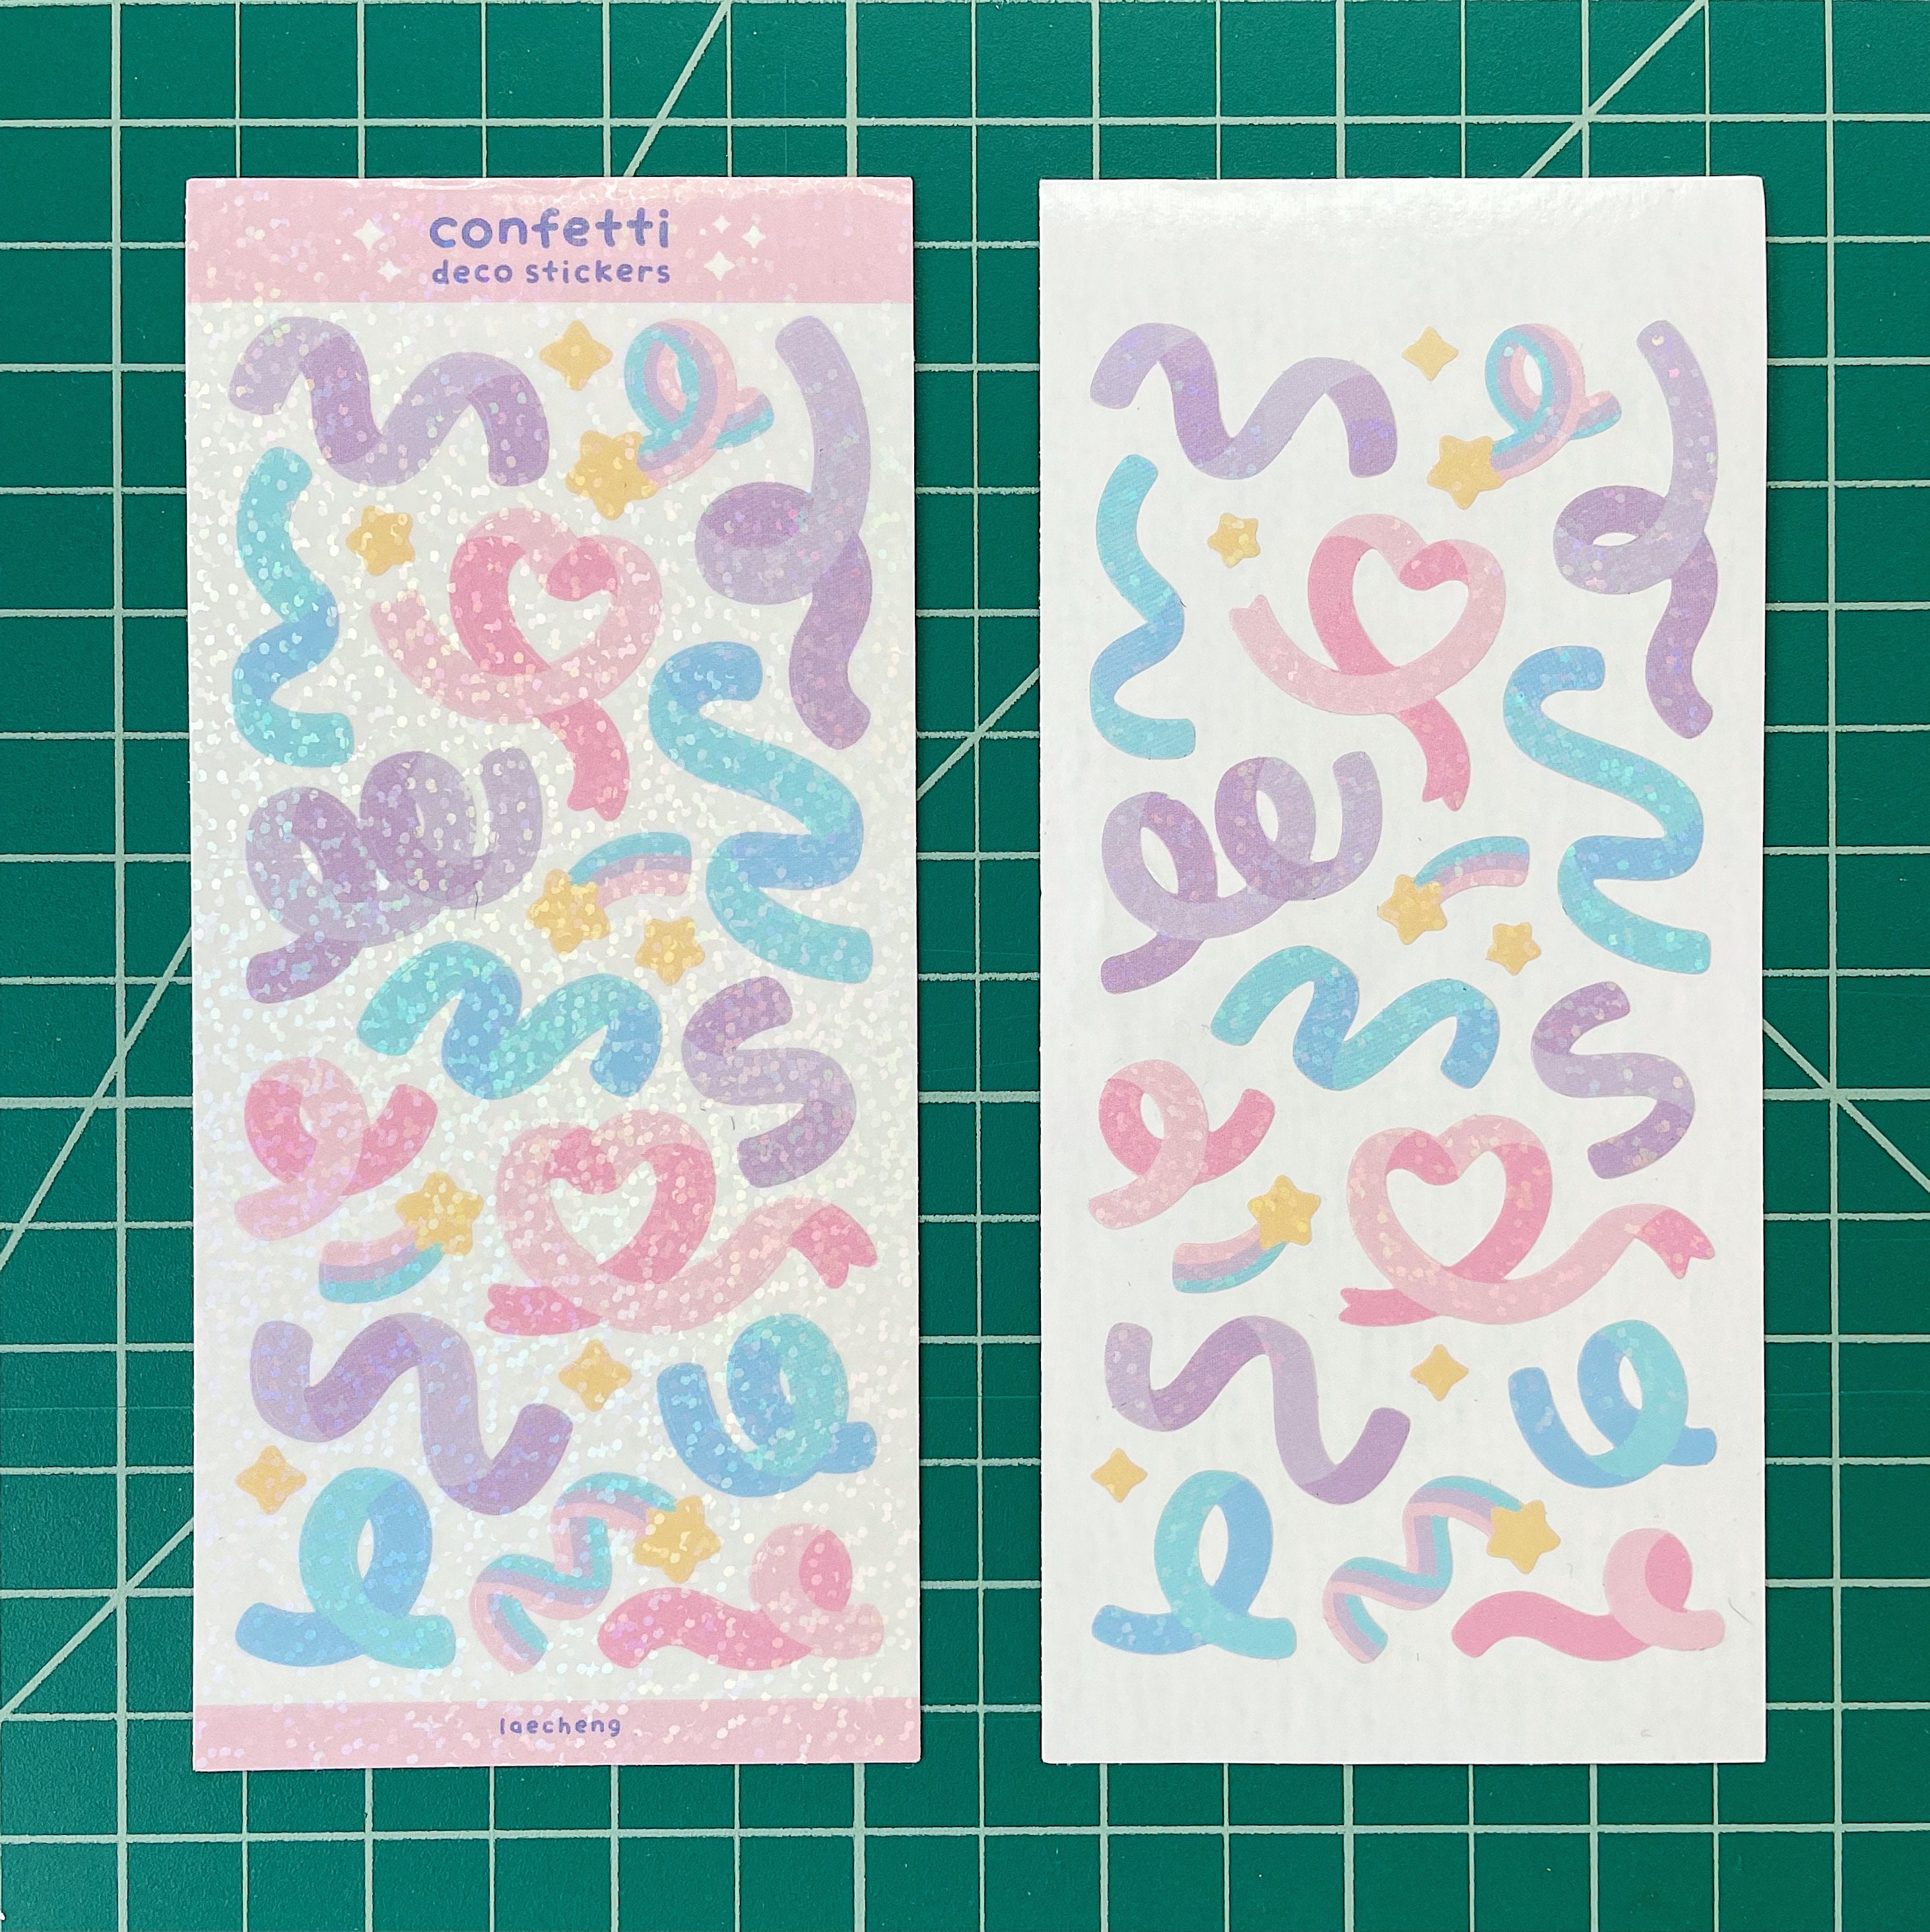 18 Sheets Colorful Small Letter Stickers, Self Adhesive Alphabet Korean  Deco Stickers, Glitter Ribbon Sticker, Kawaii Polco Confetti Stickers, for  PhotoCard Stationery Scrapbook Toploader Decorative (Color: Kawaii)